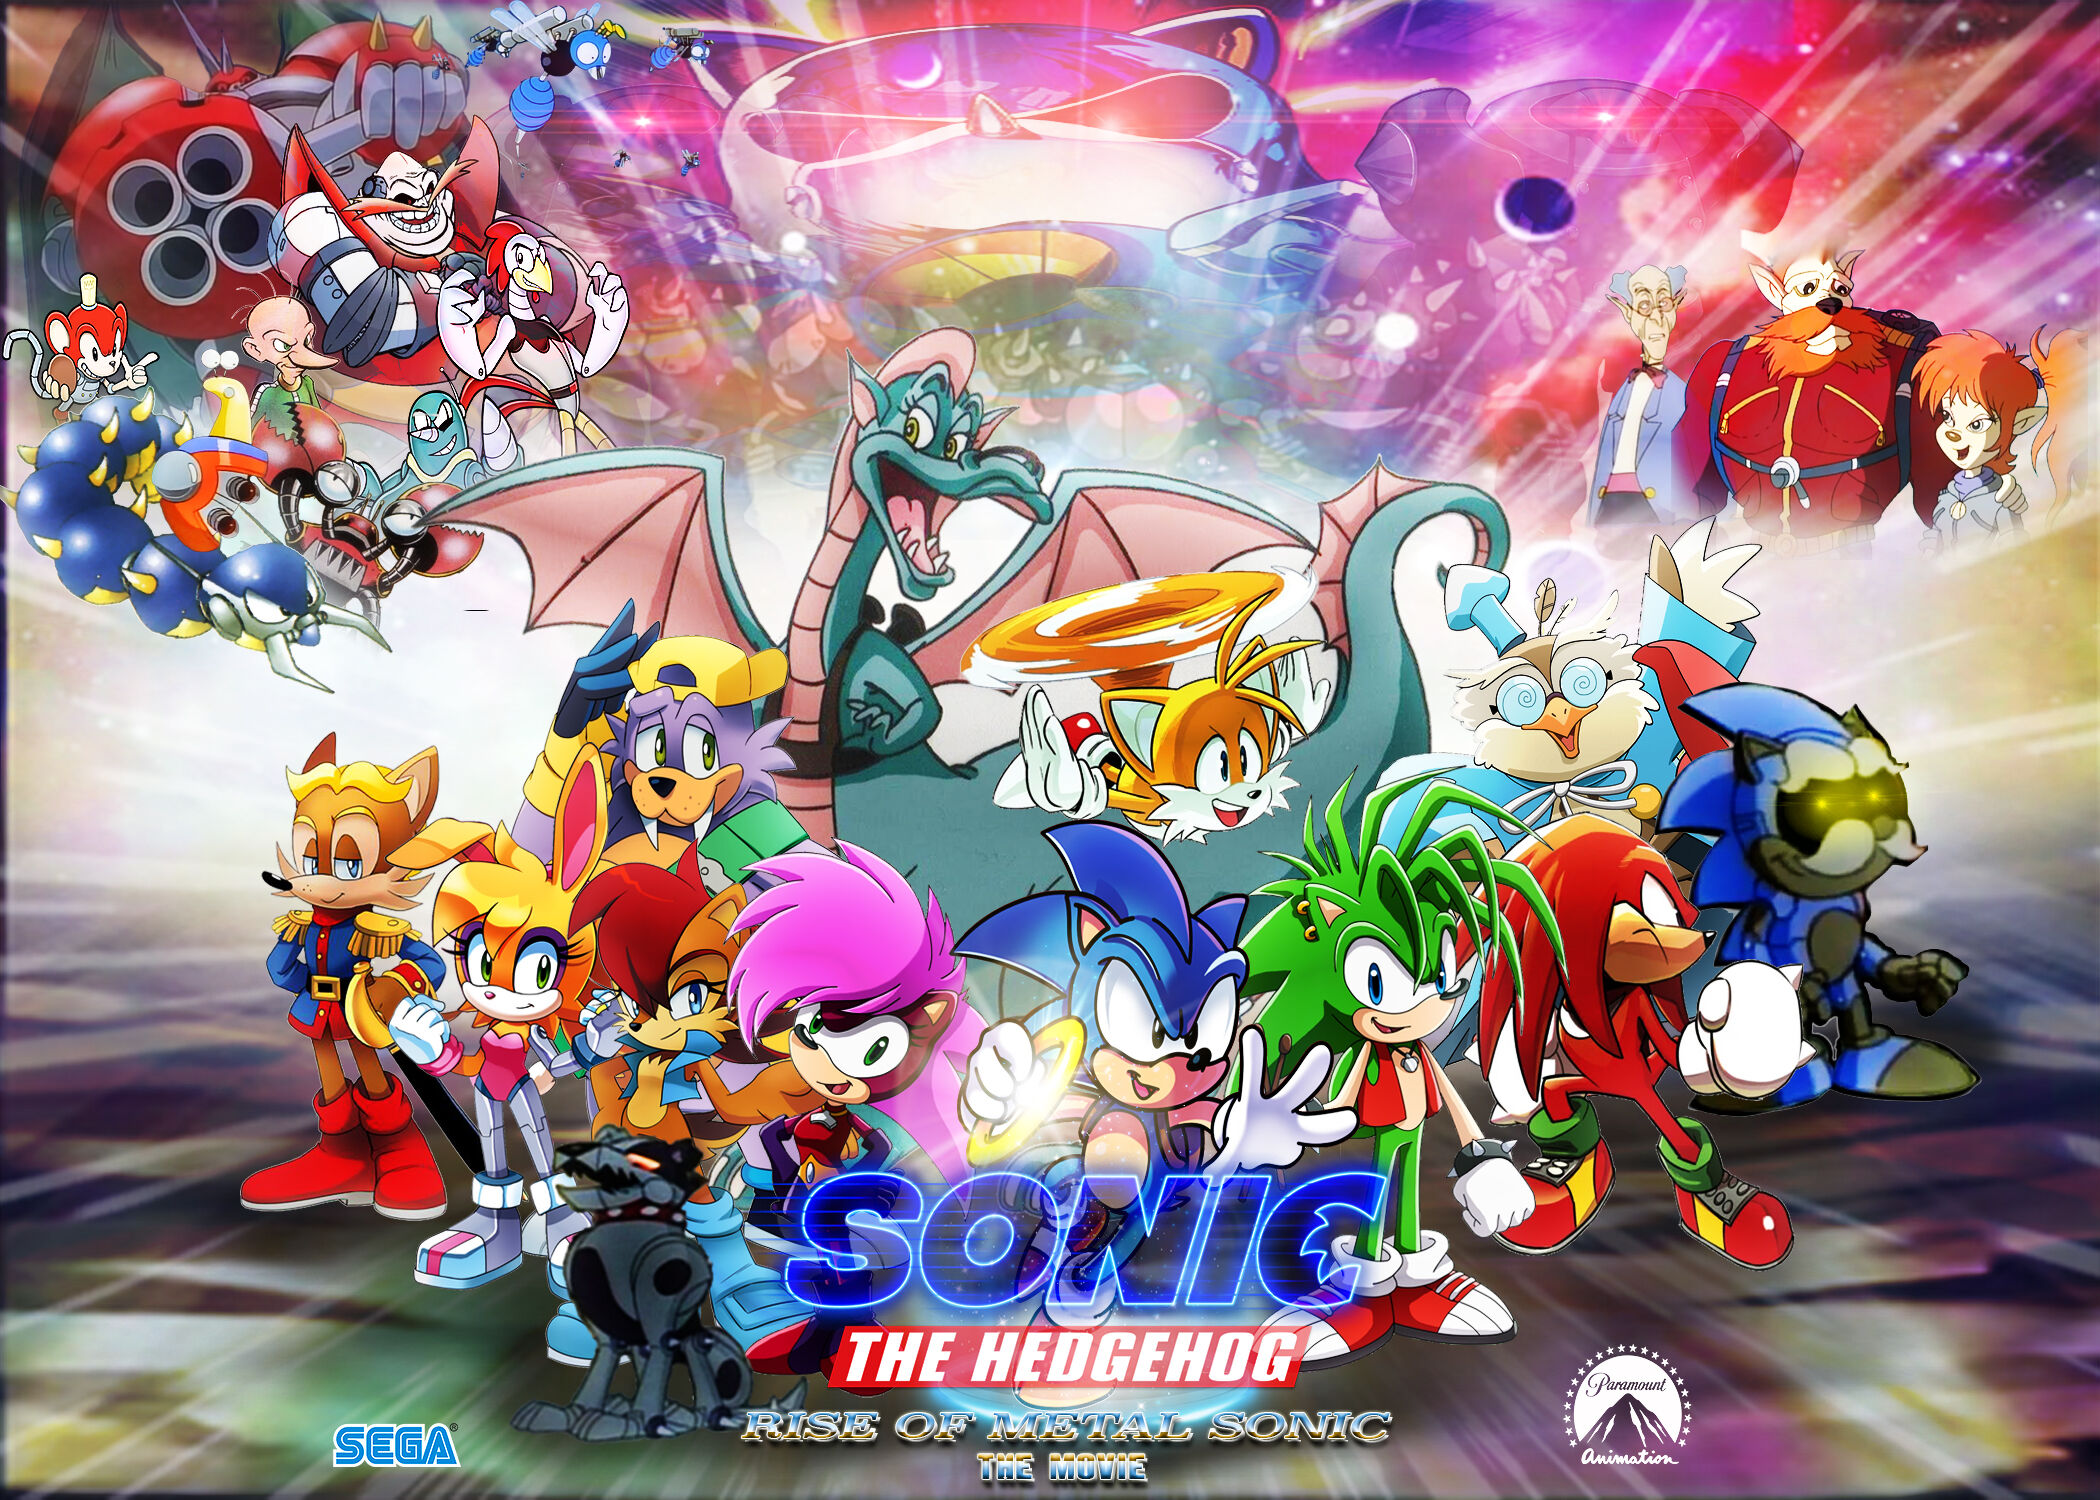 Dark sonic, dark tails, mecha knuckles, dark metal sonic, nazo, an Amy I  can't even describe, metal nazo and fed super sonic : r/SonicTheHedgehog